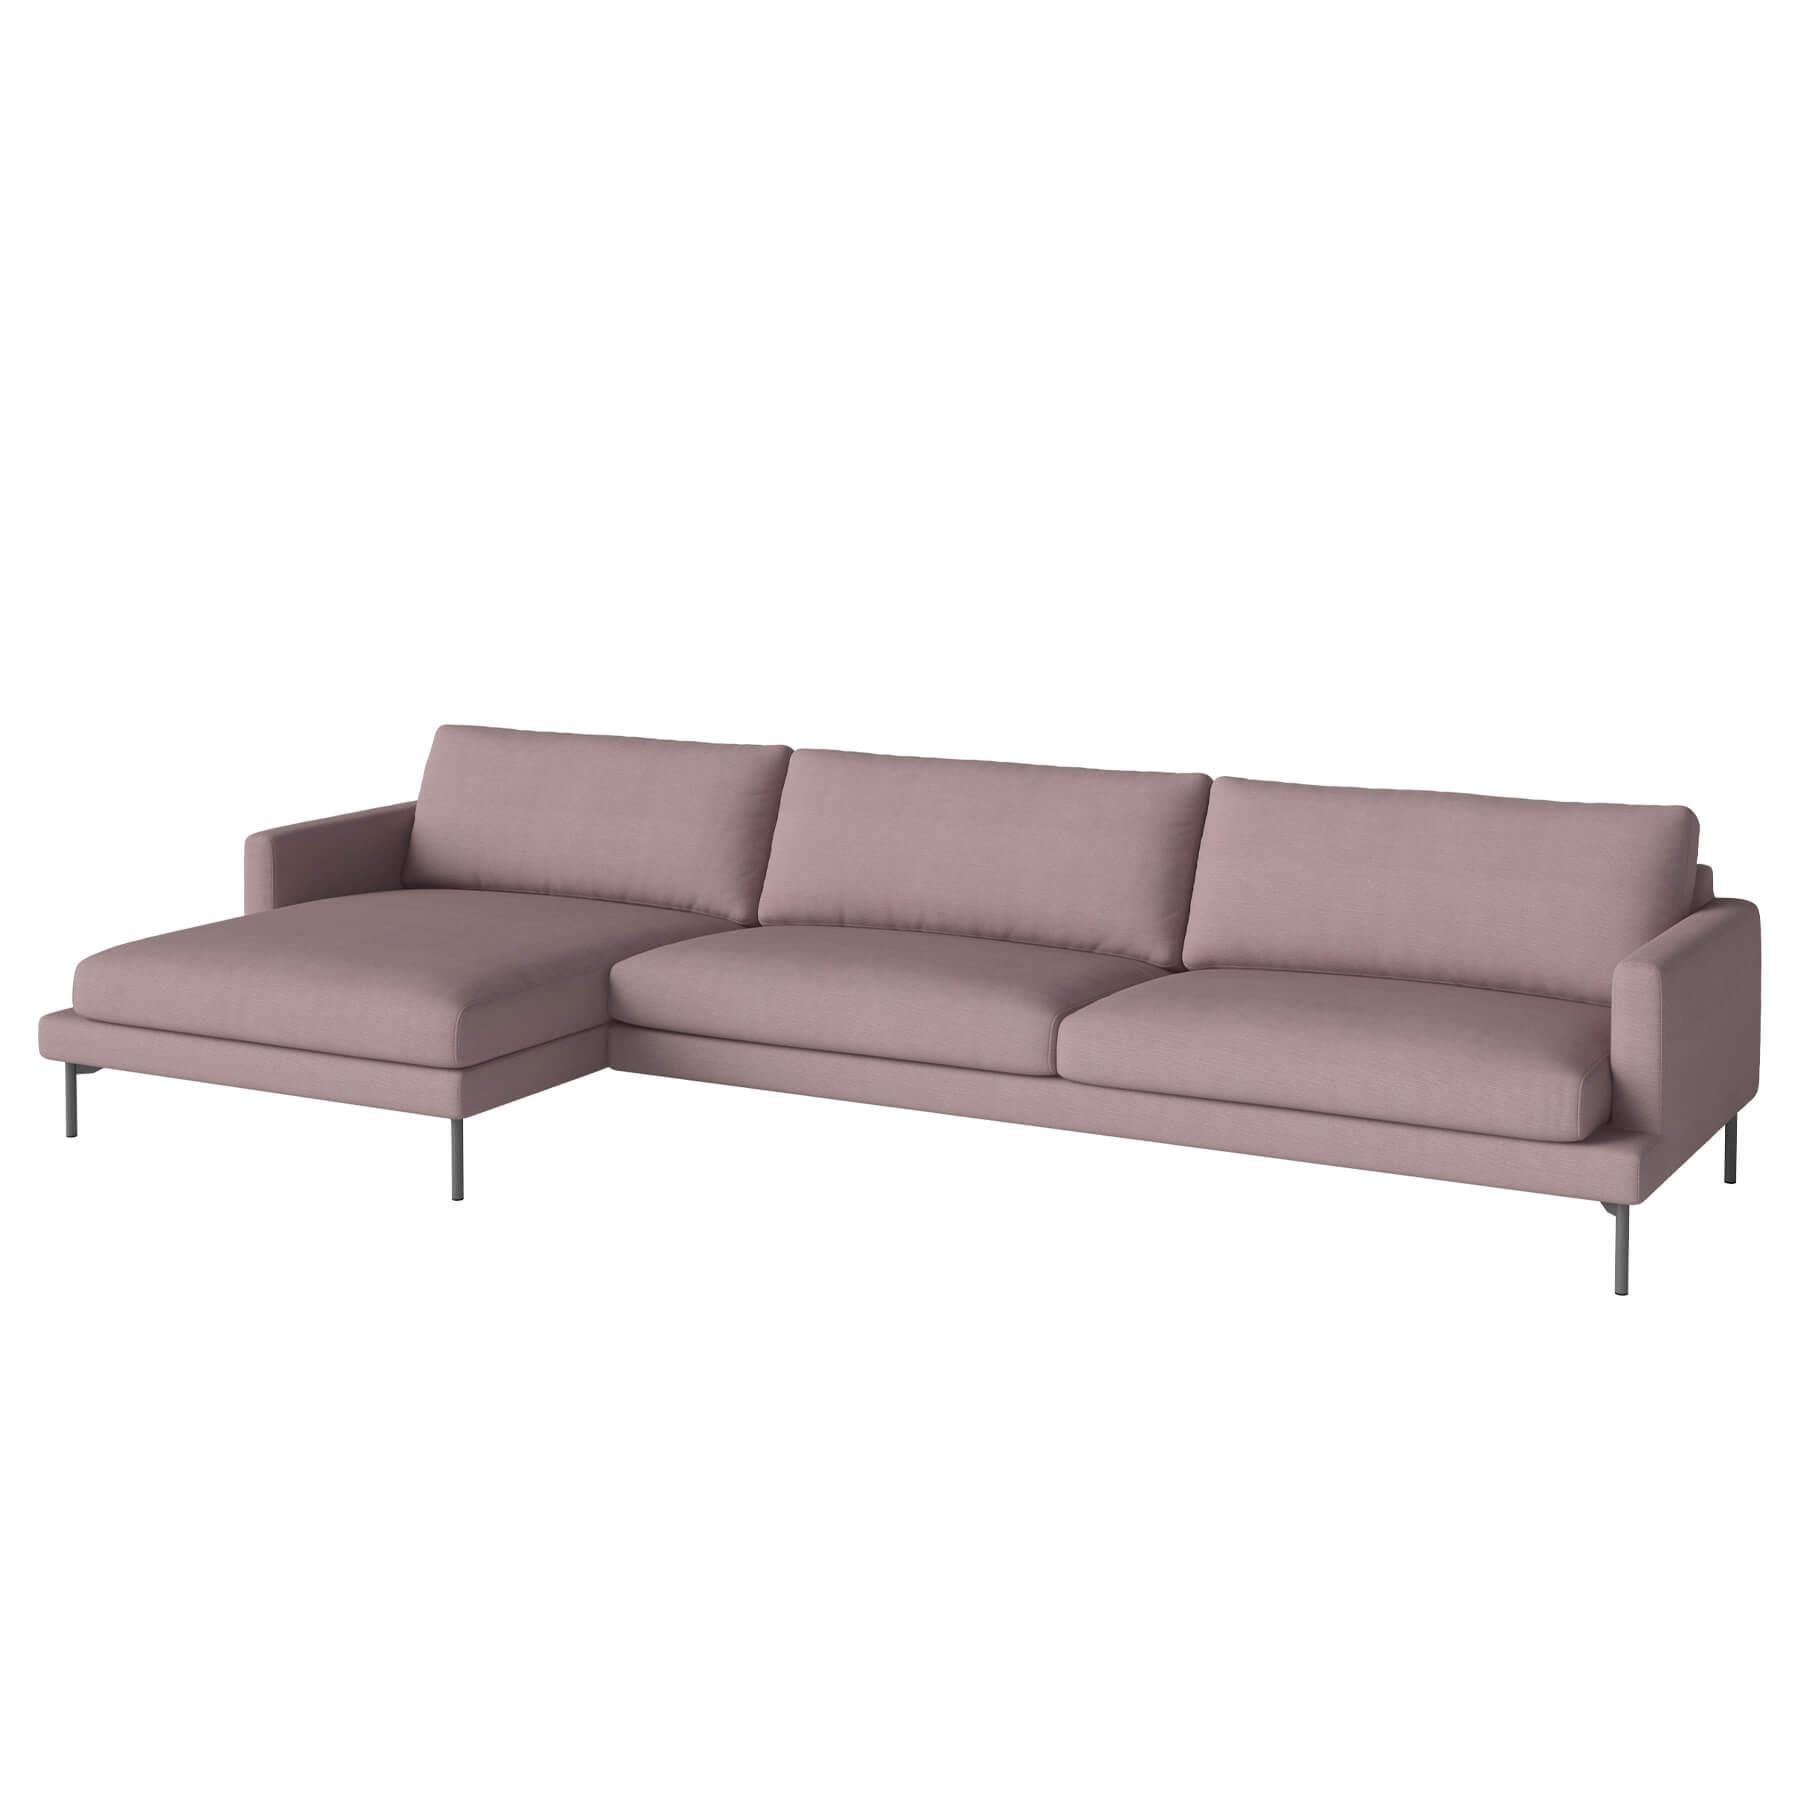 Bolia Veneda Sofa 45 Seater Sofa With Chaise Longue Grey Laquered Steel Linea Rosa Left Pink Designer Furniture From Holloways Of Ludlow